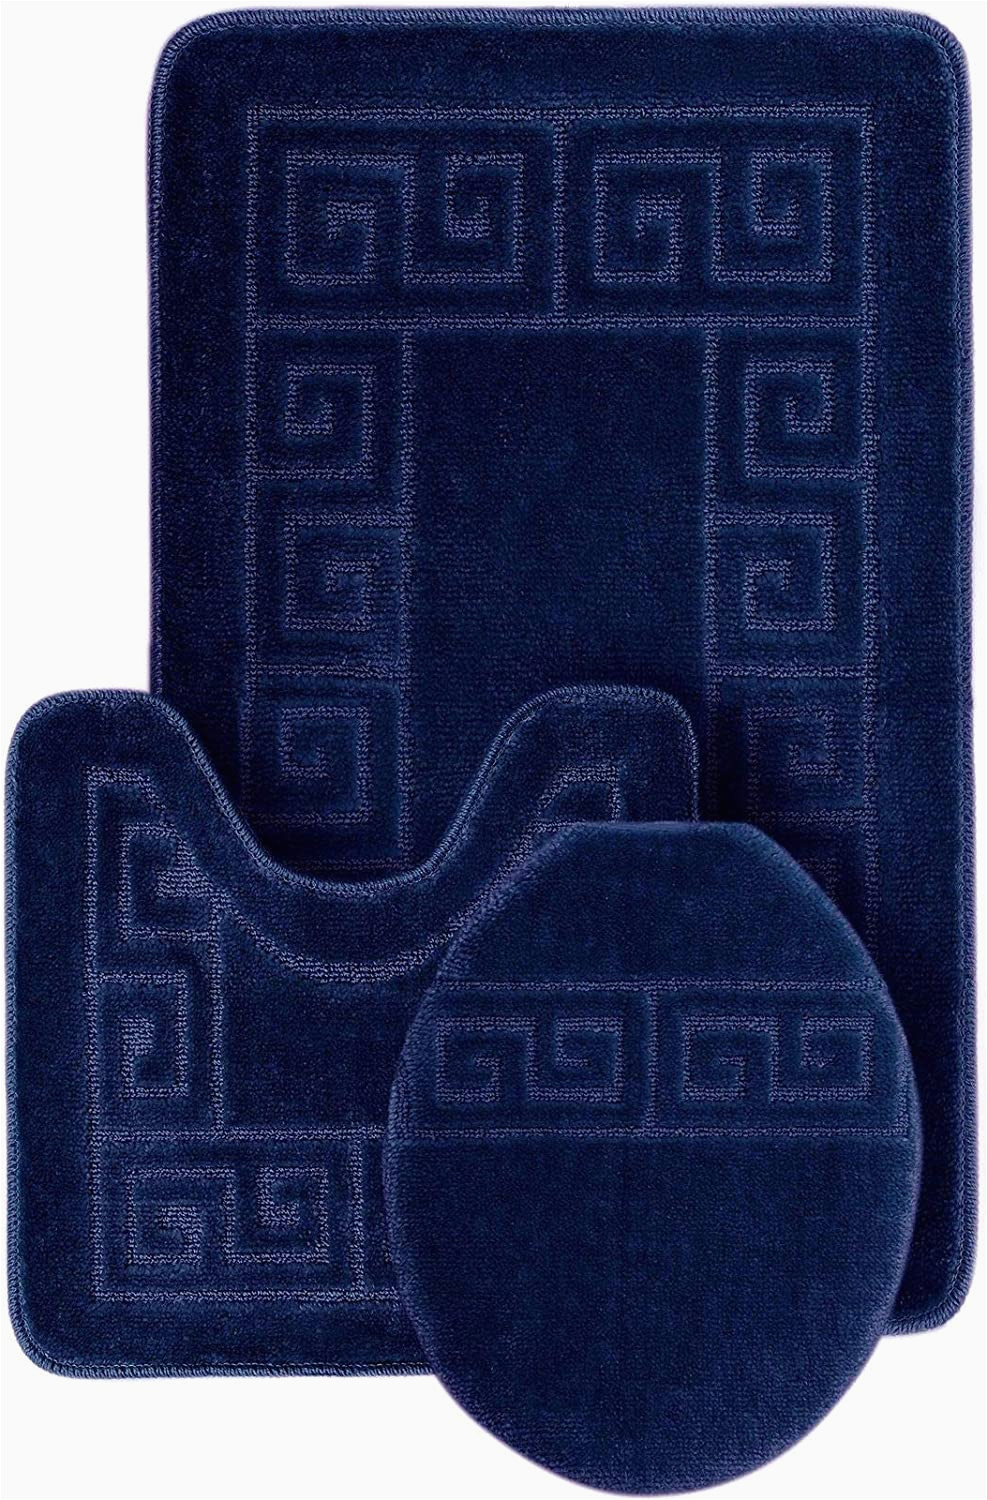 Blue Bath Rug Sets Wpm World Products Mart Bathroom Rugs Set 3 Piece Bath Pattern Rug 20×32 Large Contour Mats 20×20 with Lid Cover Navy